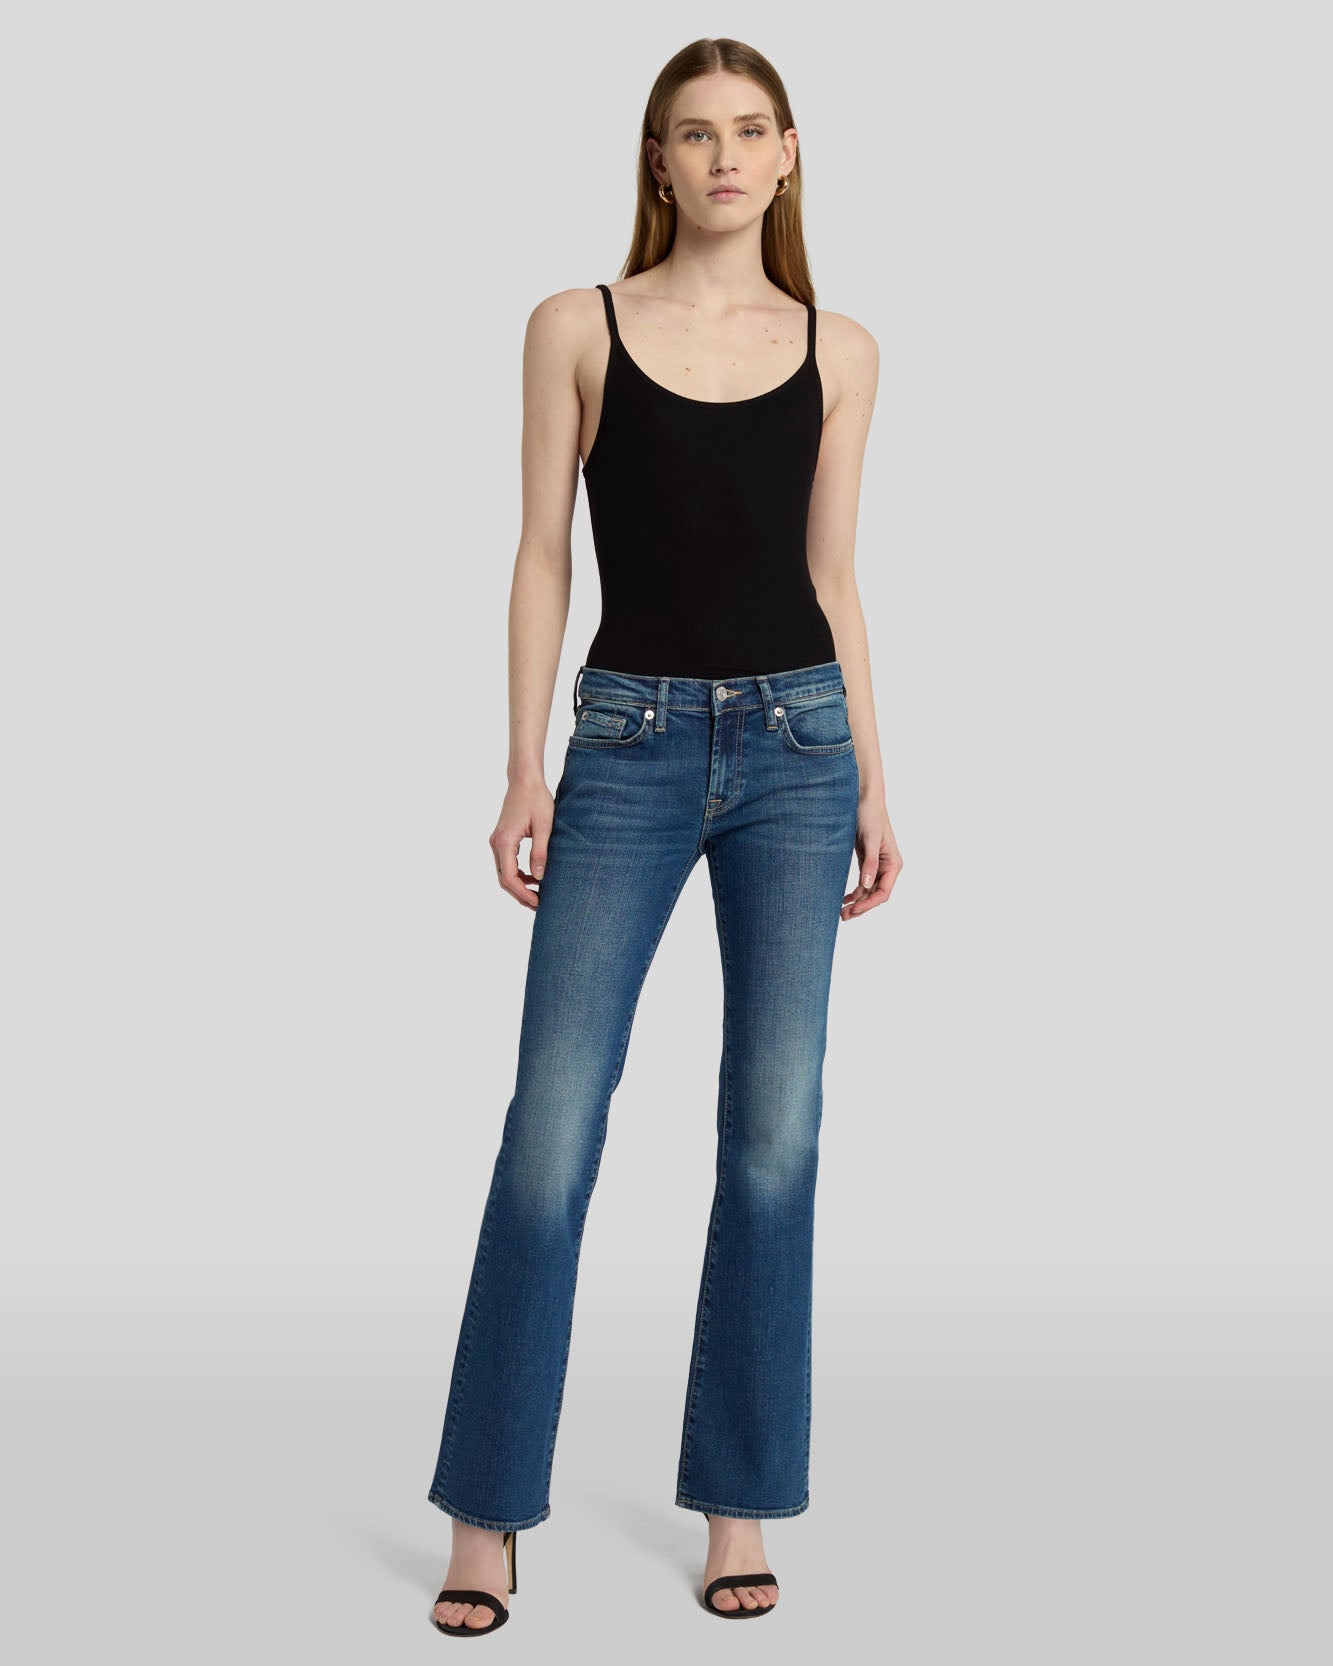 Low rise jeans, Various colors, Collection 2021